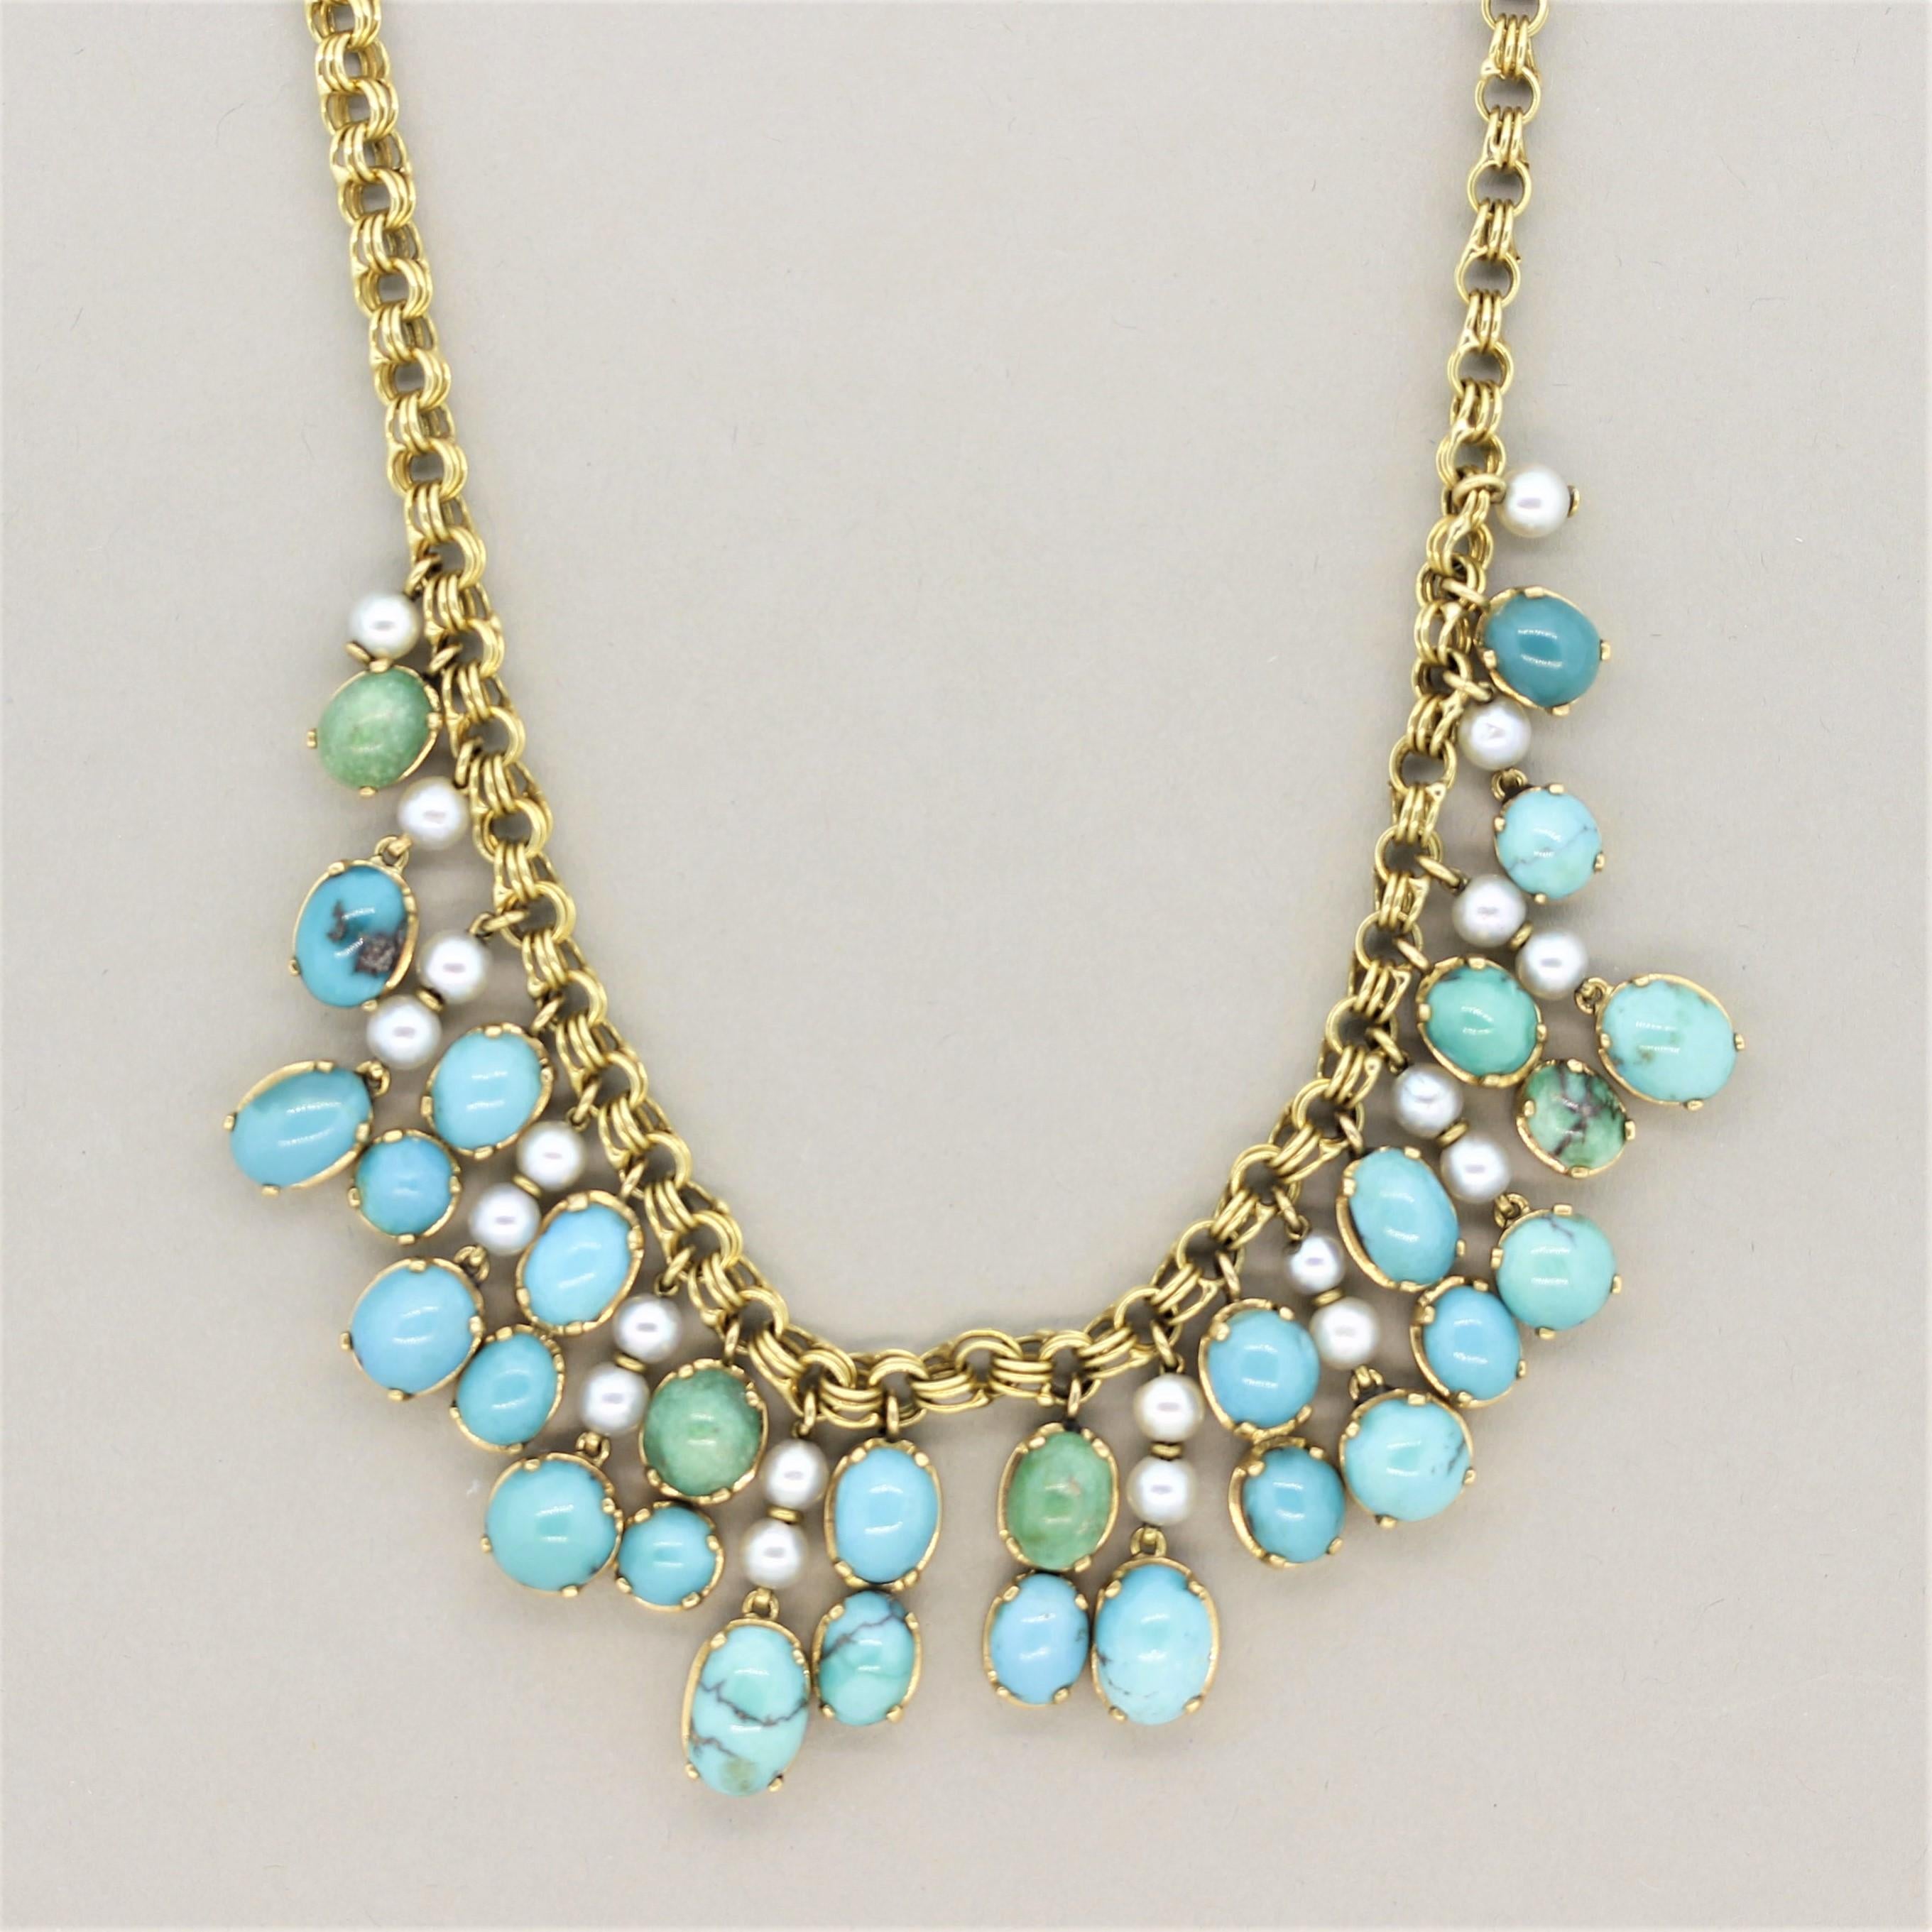 A sweet necklace featuring turquoise of varying colors! The turquoise includes classic veined pieces as well as un veined pieces in colors ranging from blue-green to a sky blue. Accenting the turquoise are seed pearls which are set atop the